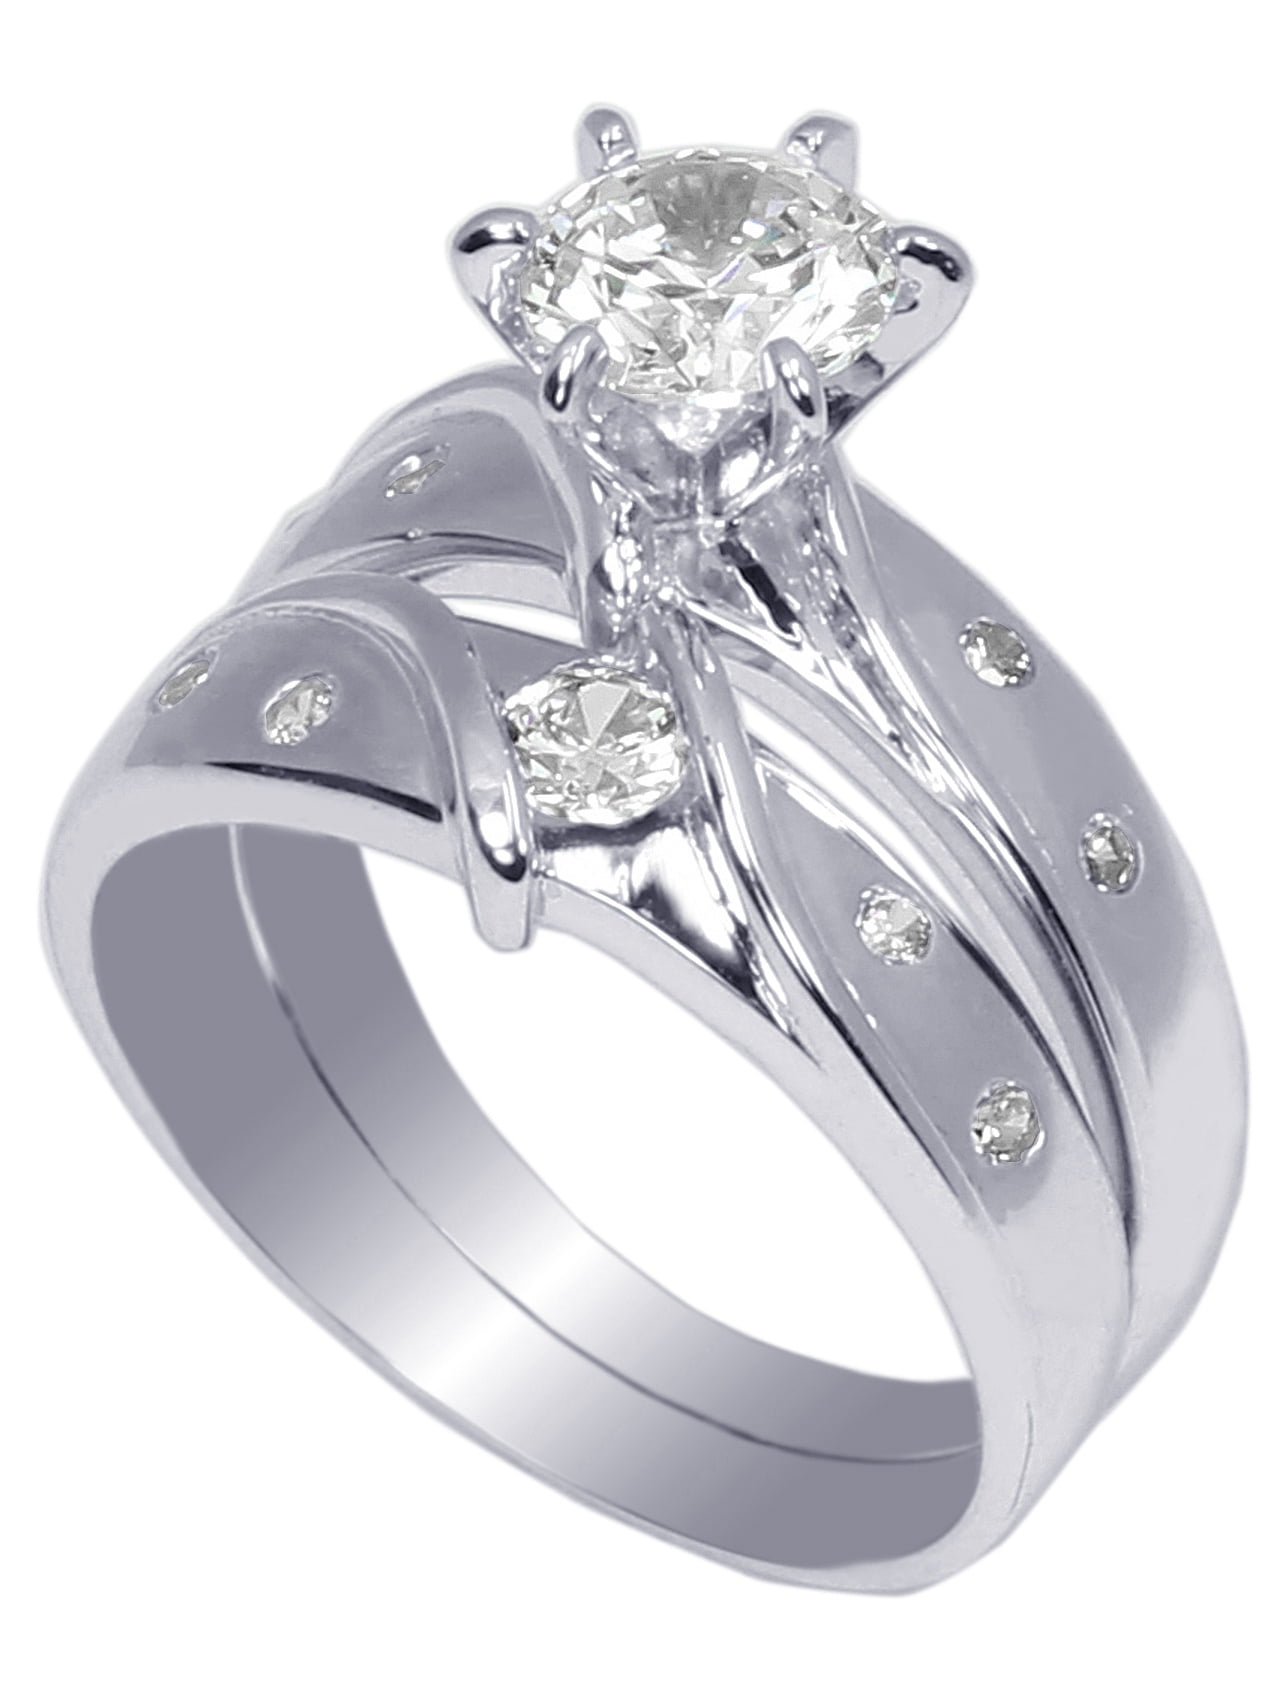 JamesJenny 10K White Gold 0.9ct Round CZ Wedding Solid Solitaire Ring Size 4-10 